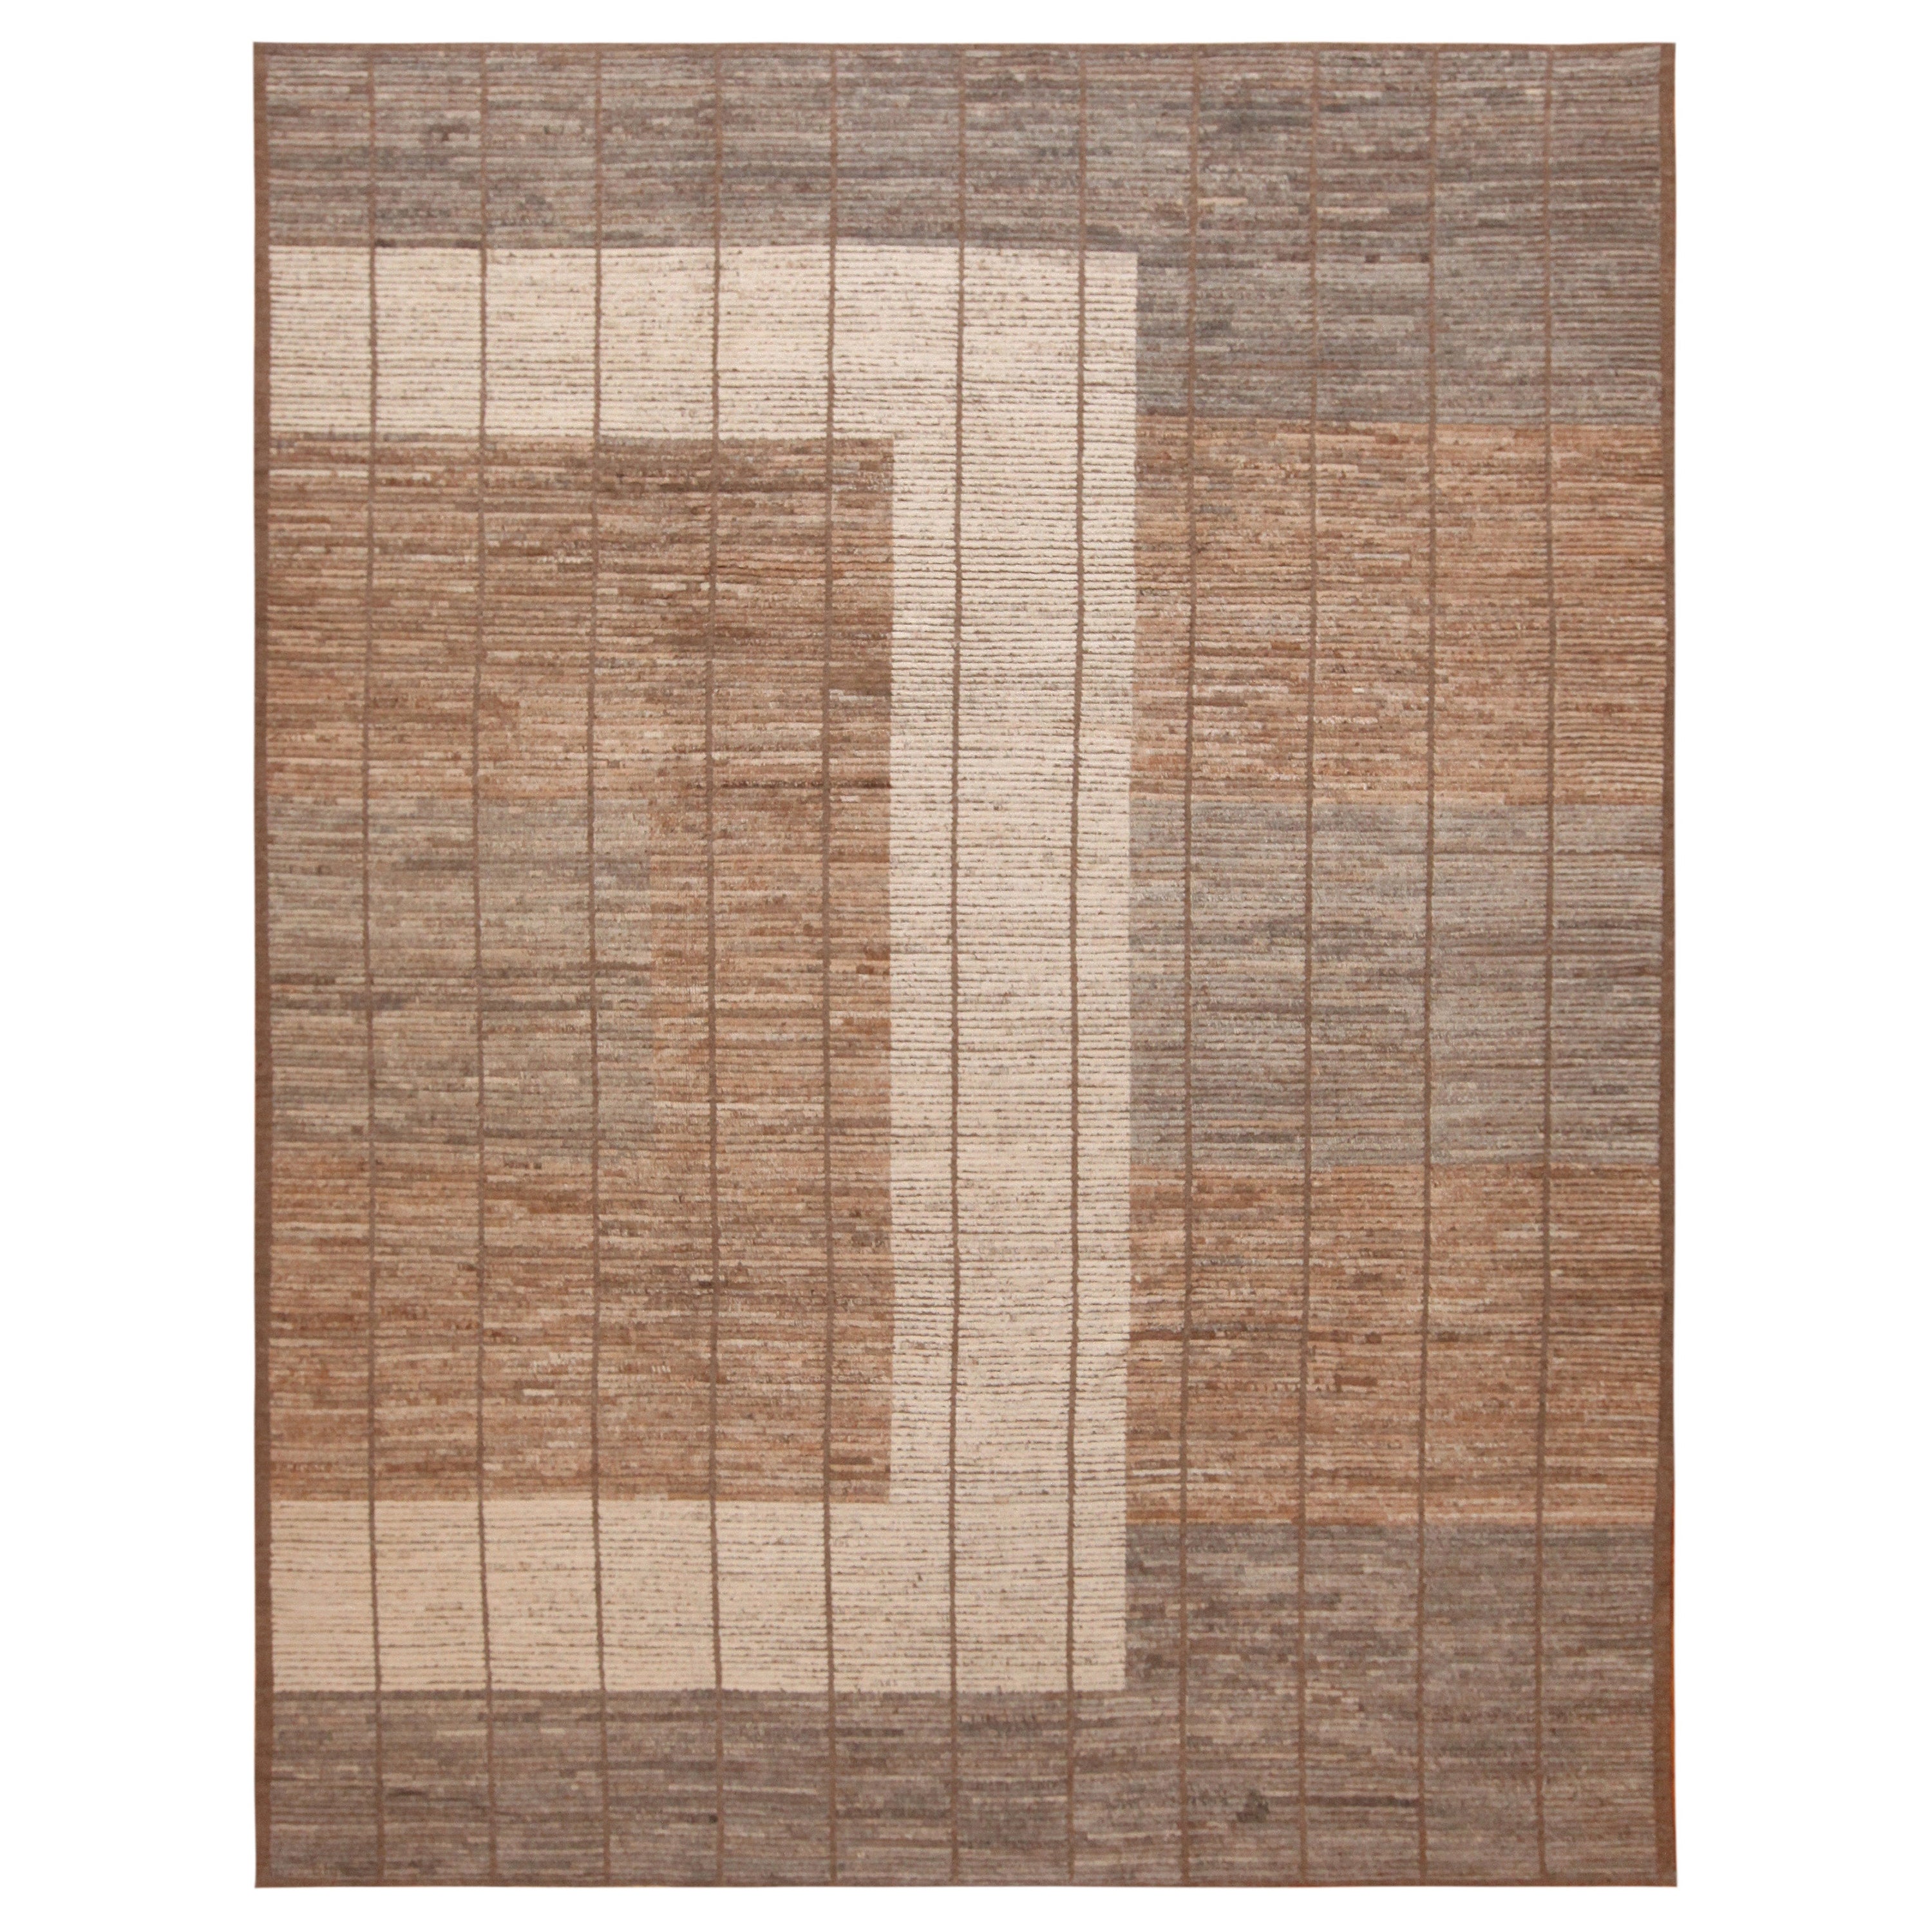 Nazmiyal Collection Earthy Tones Modern Decorative Rug. 9 ft 3 in x 12 ft For Sale